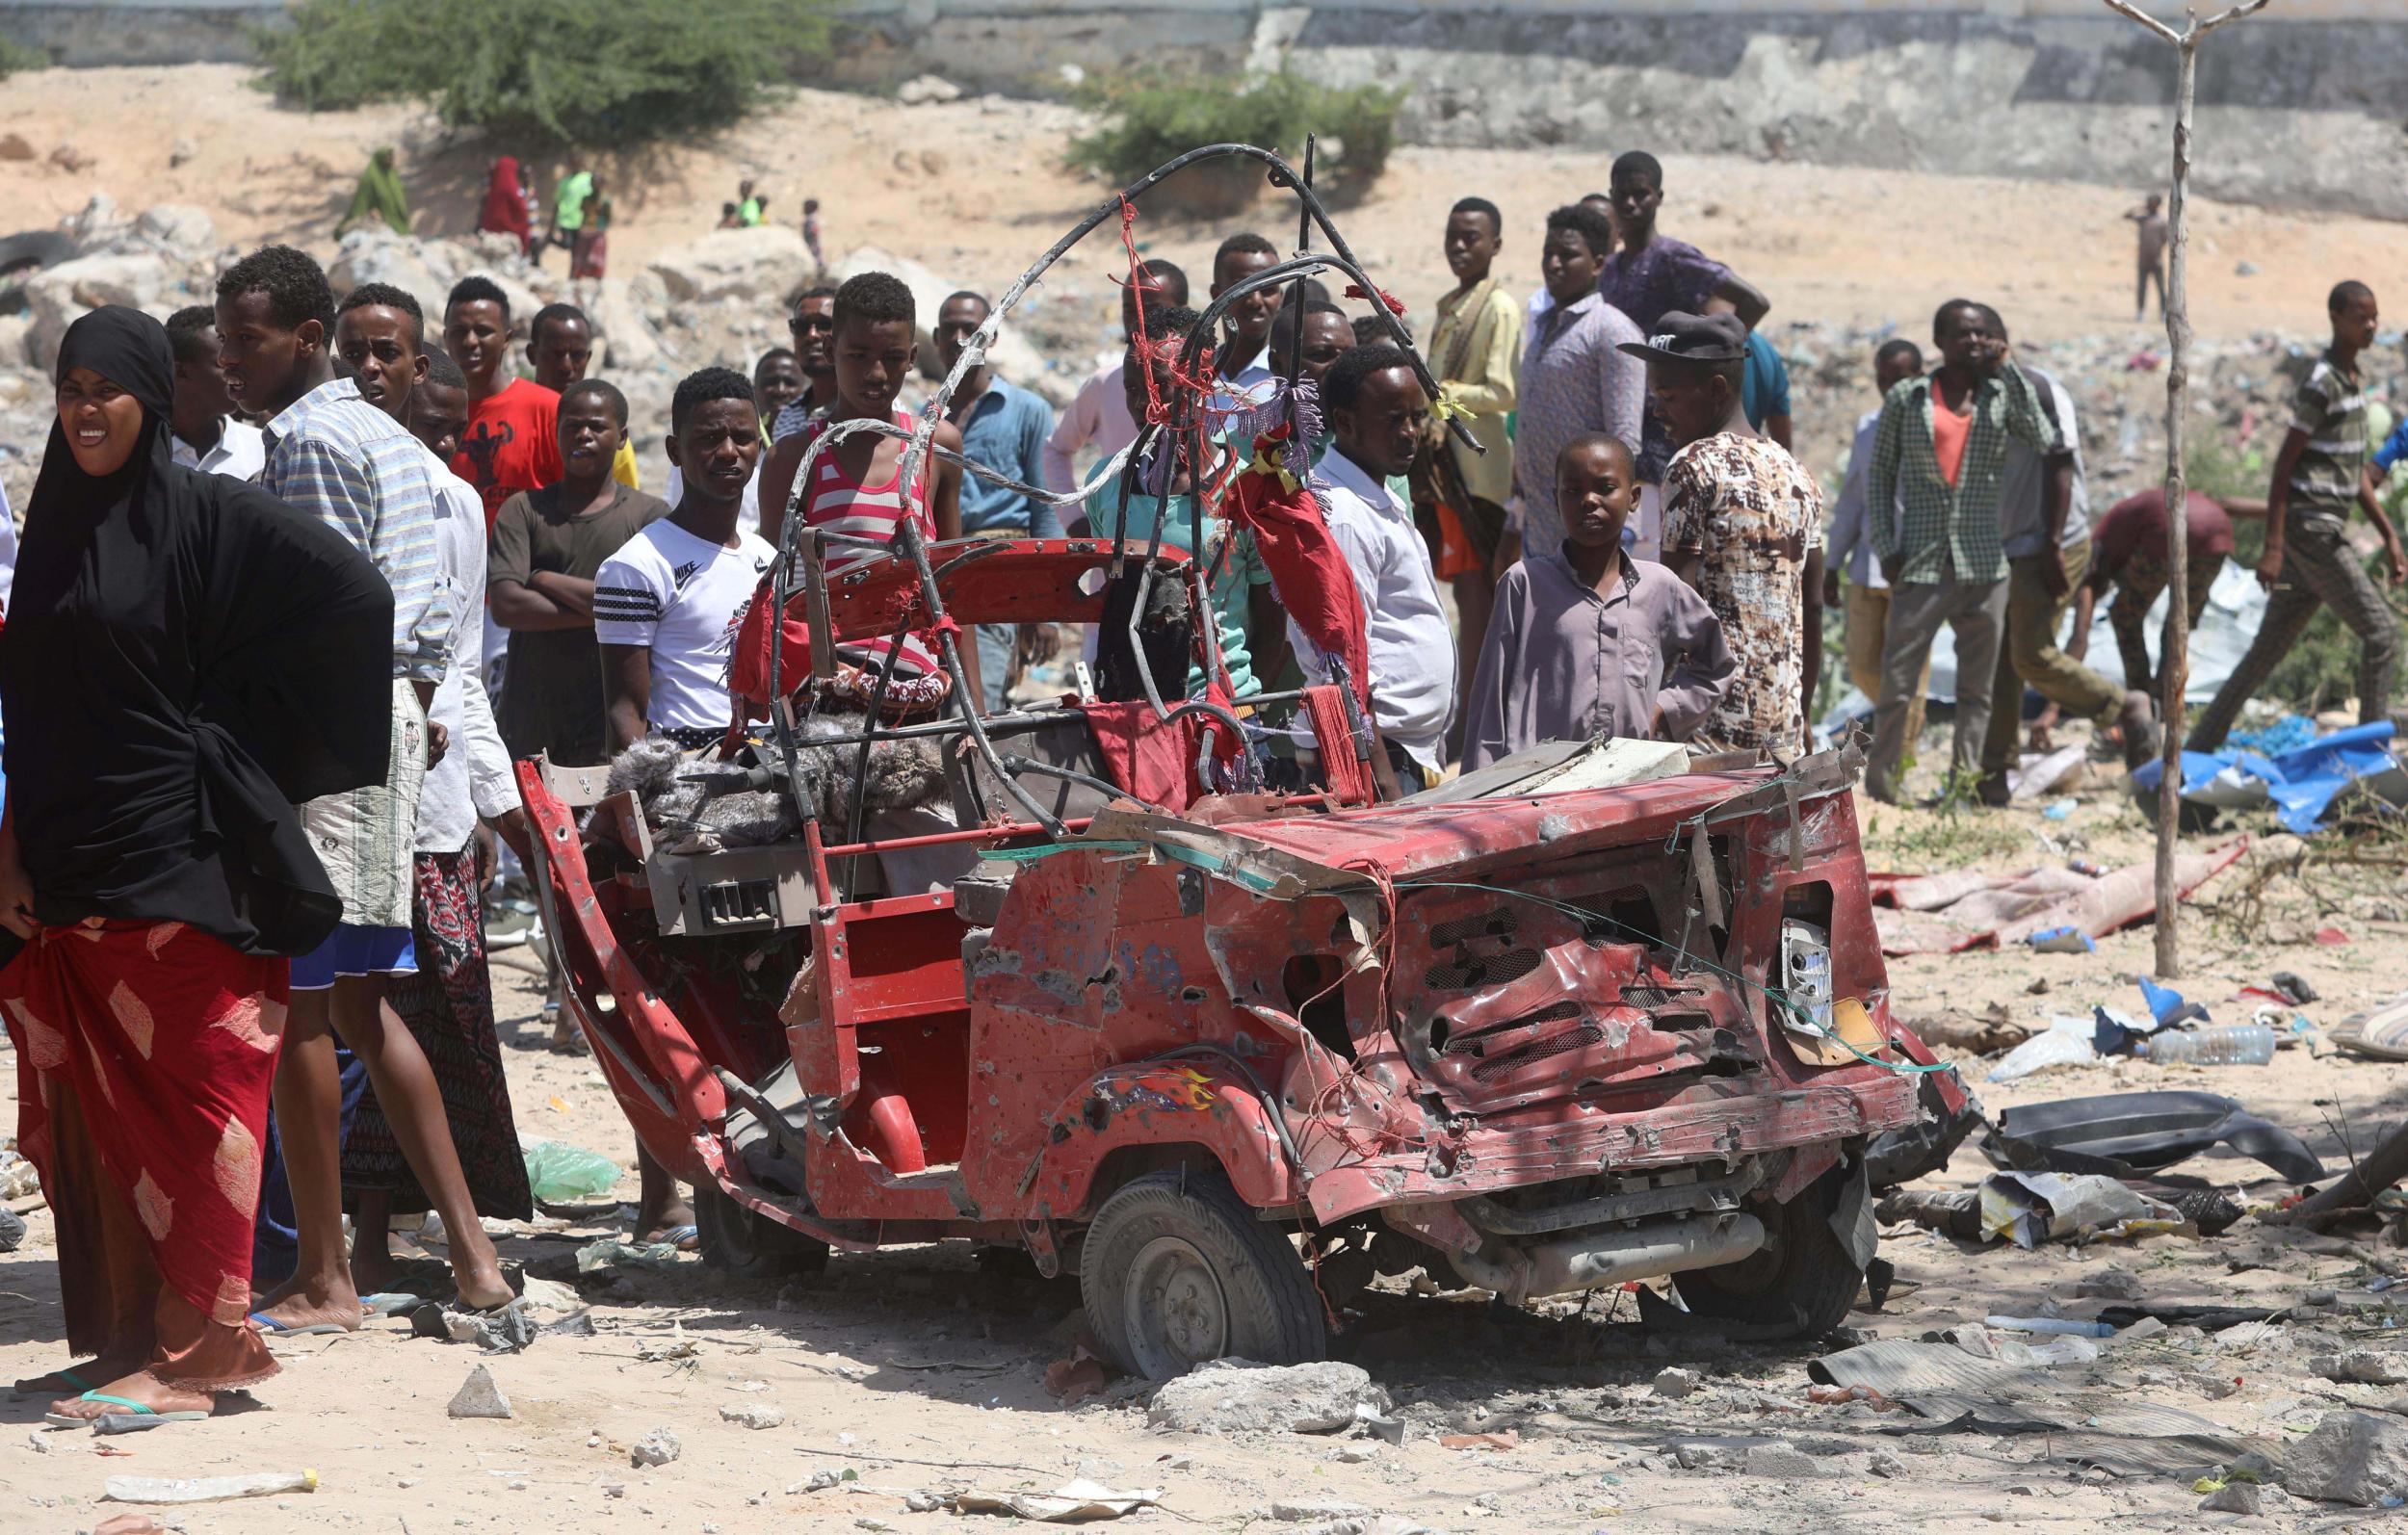 Civilians look at the remain of a rickshaw destroyed at the site of a blast in the district office of Hawlwadag in Mogadishu, Somalia.